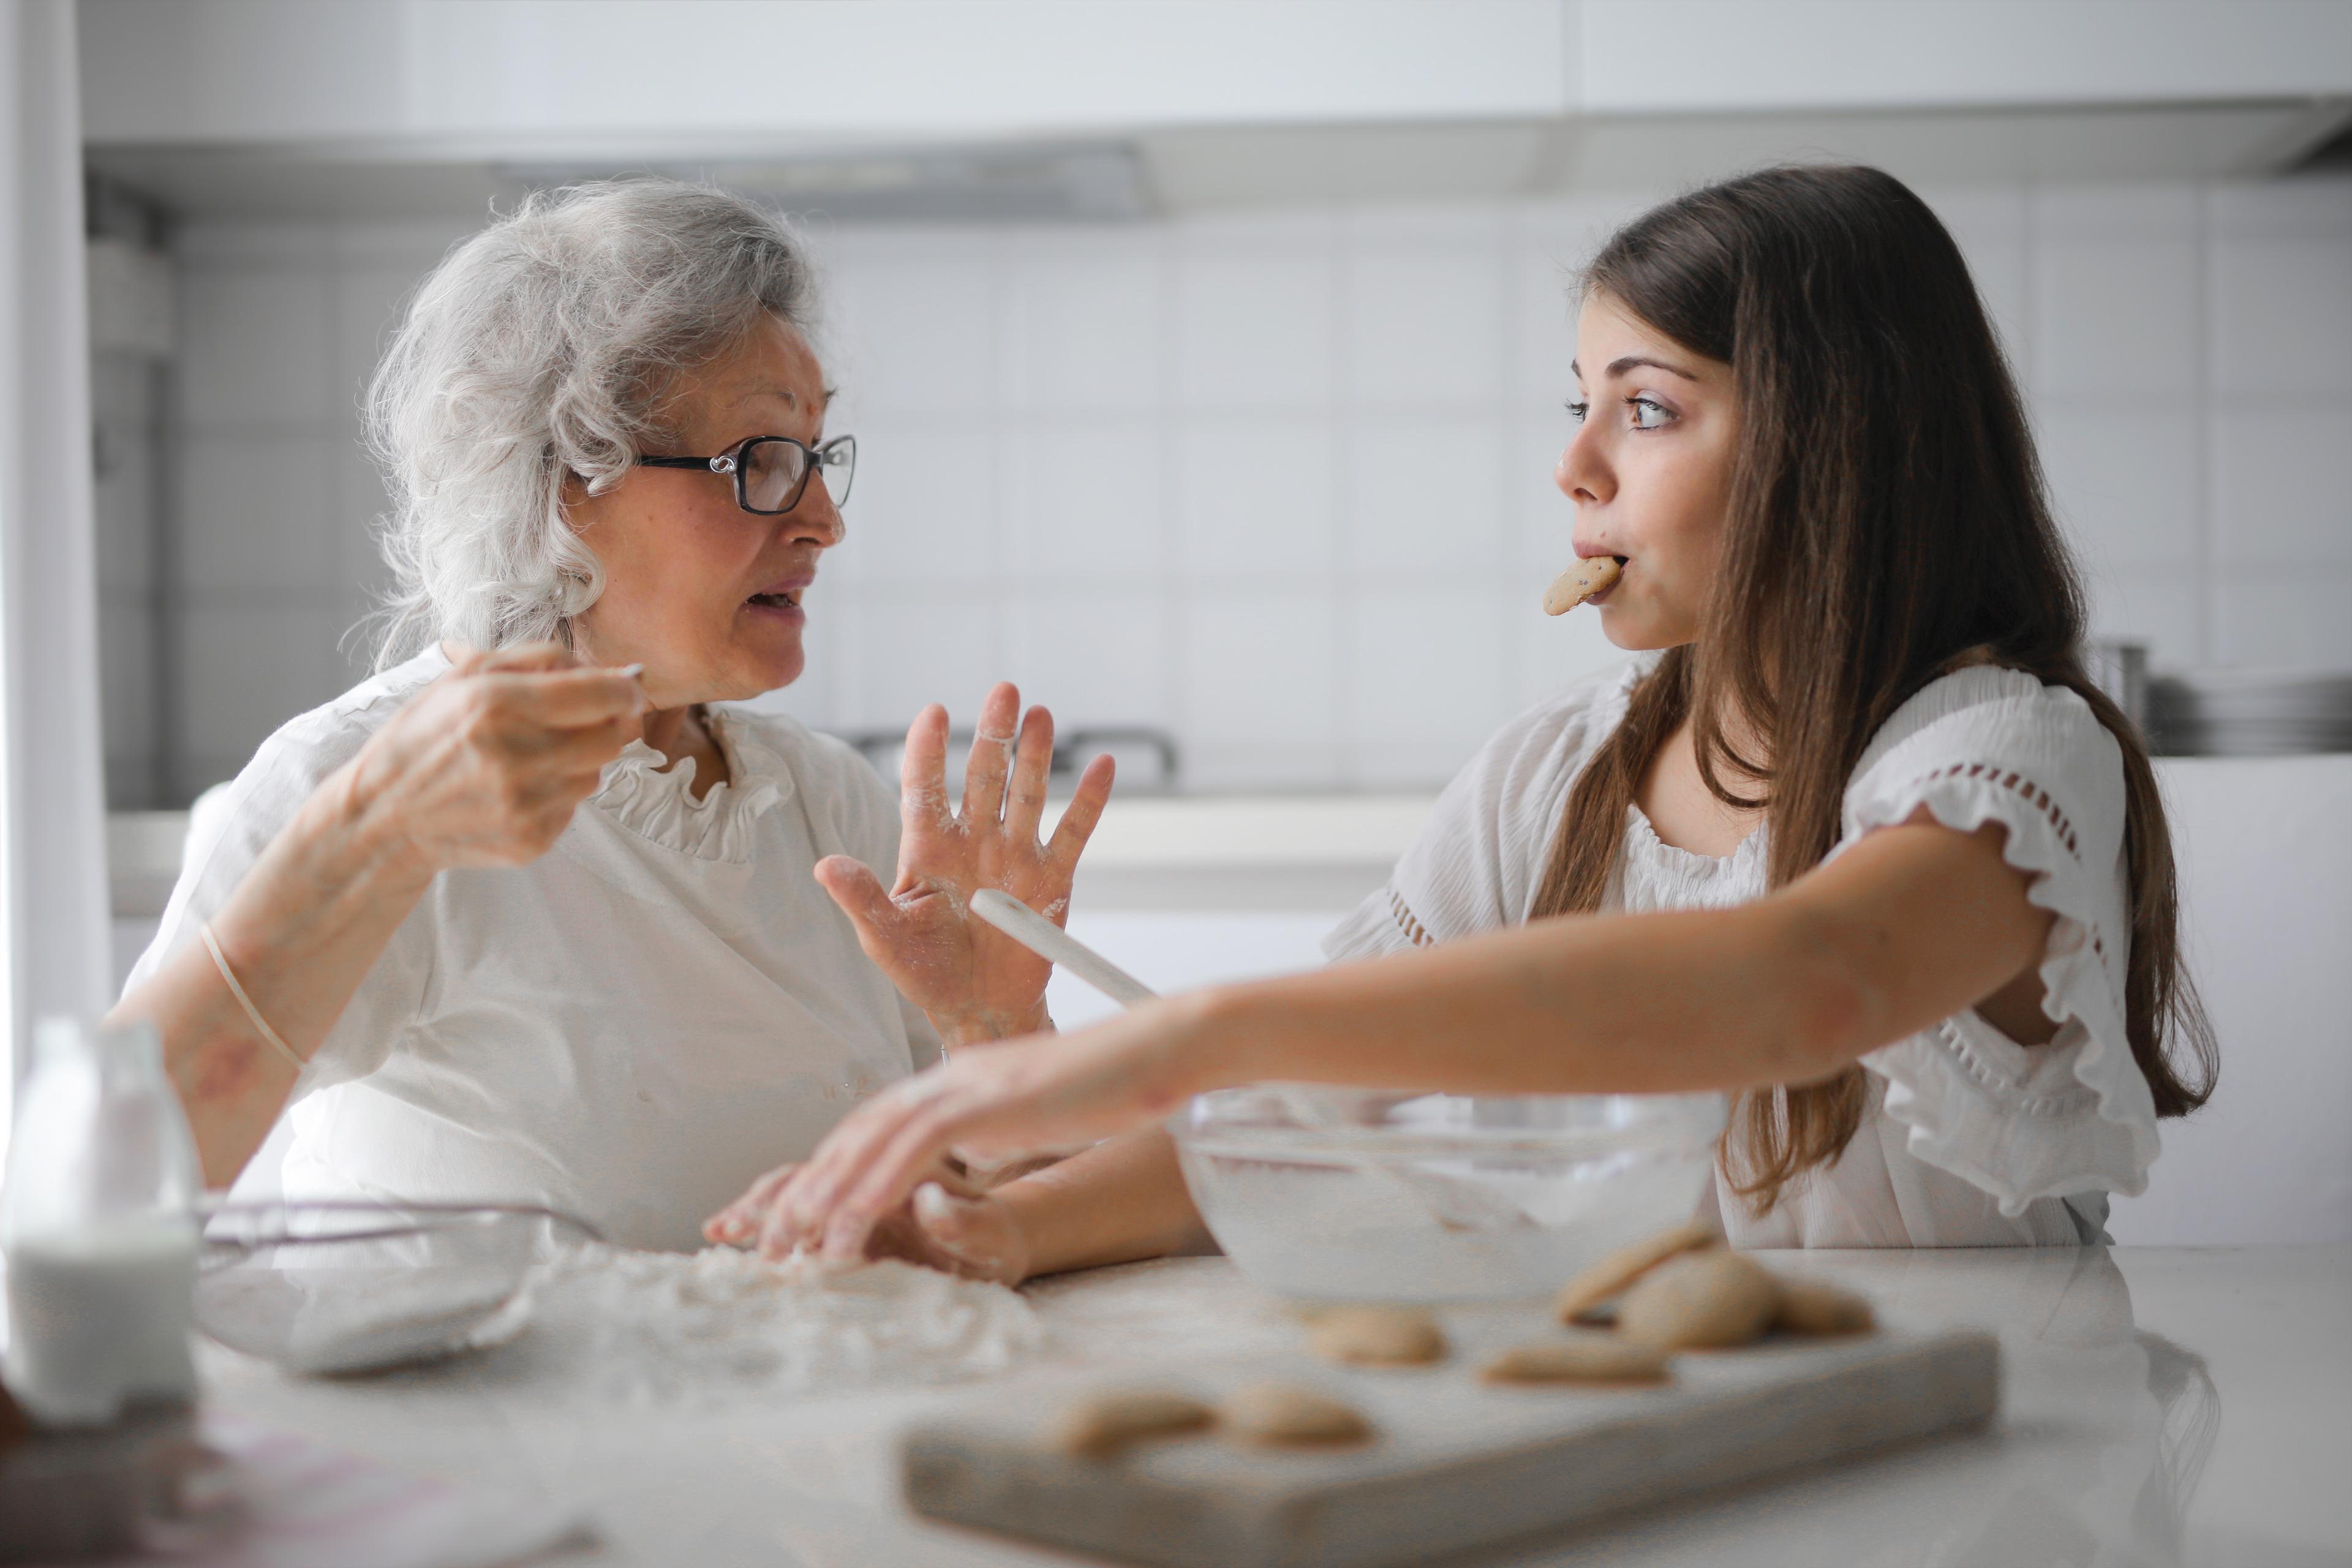 An older woman and a younger woman, both in white, sit at a table eating cookies